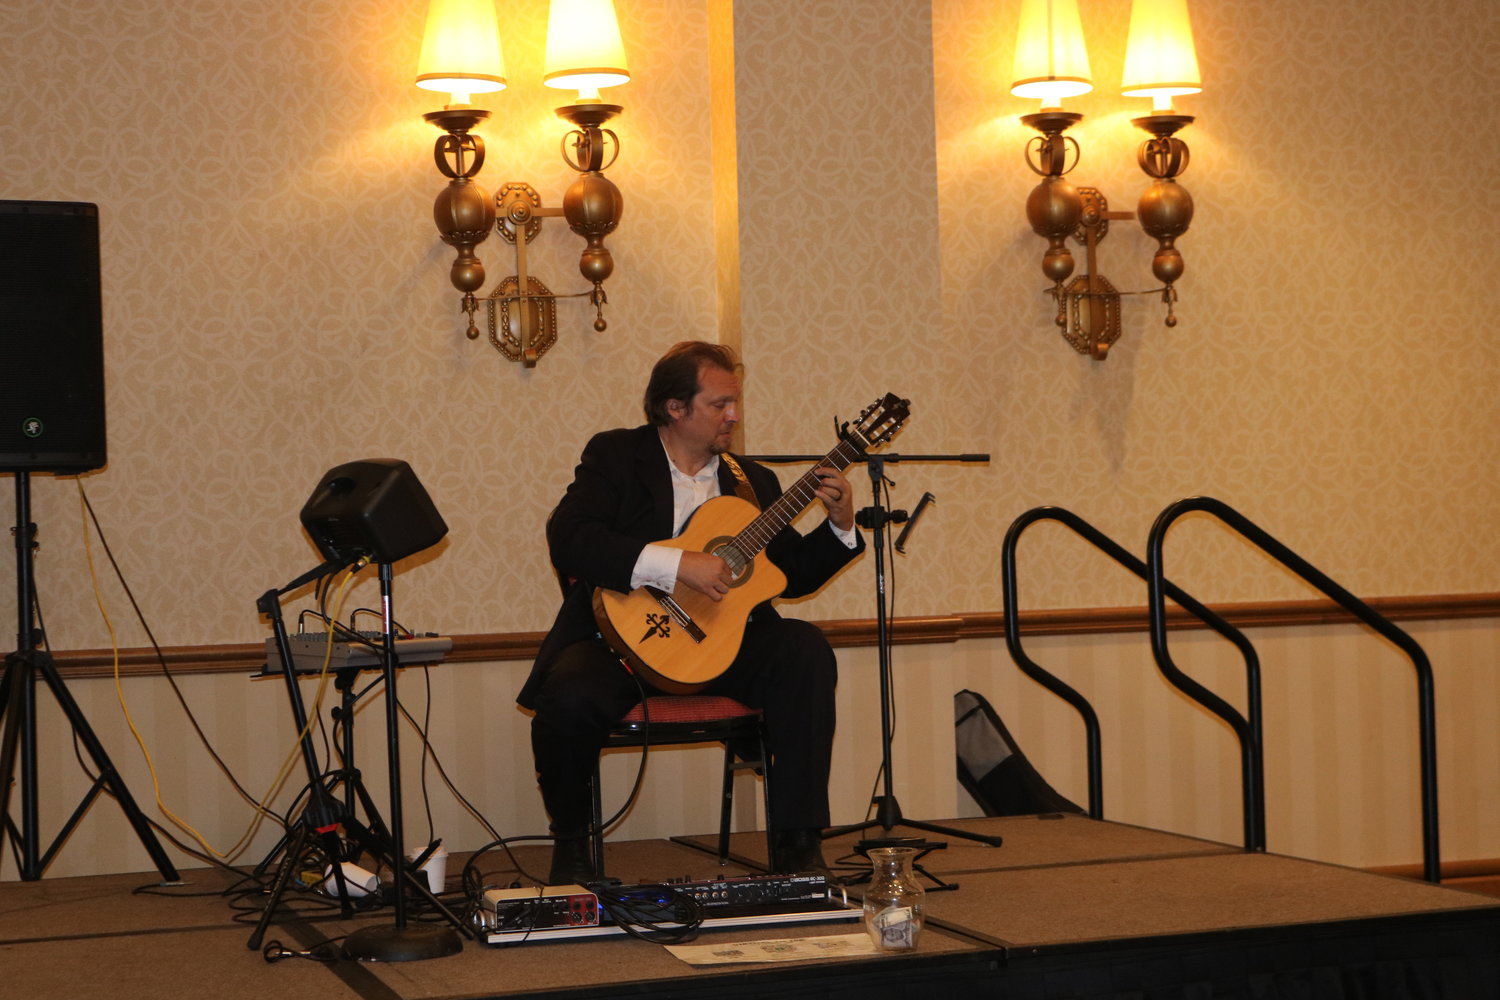 Guests were serenaded with music during the brunch.